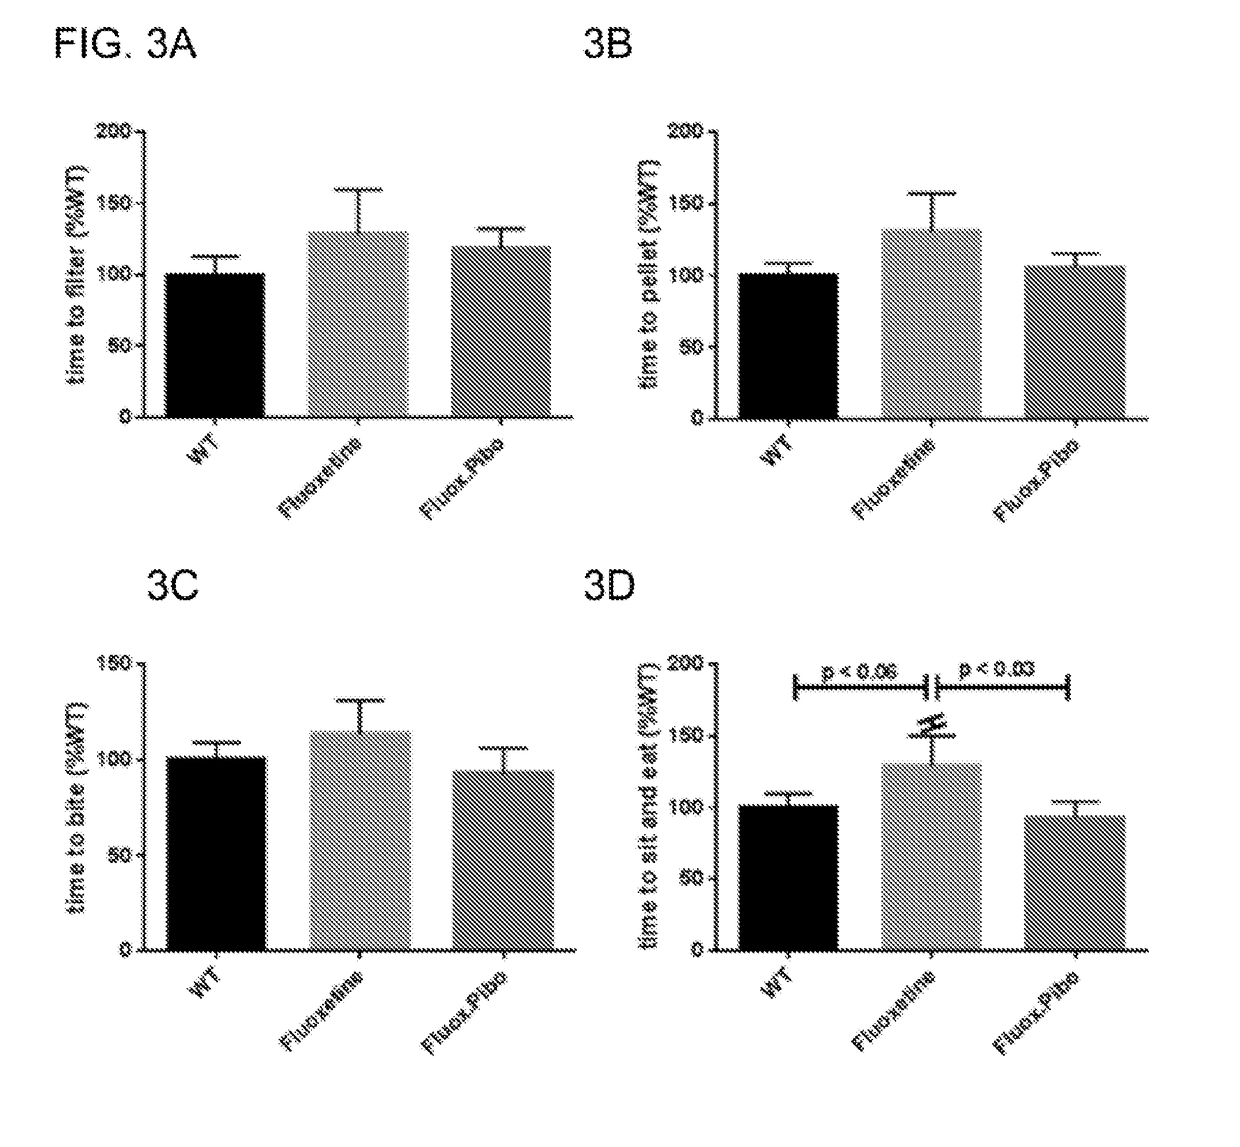 Prevention of SSRI-induced gastrointestinal dysfunction with a 5-HT4 receptor antagonist